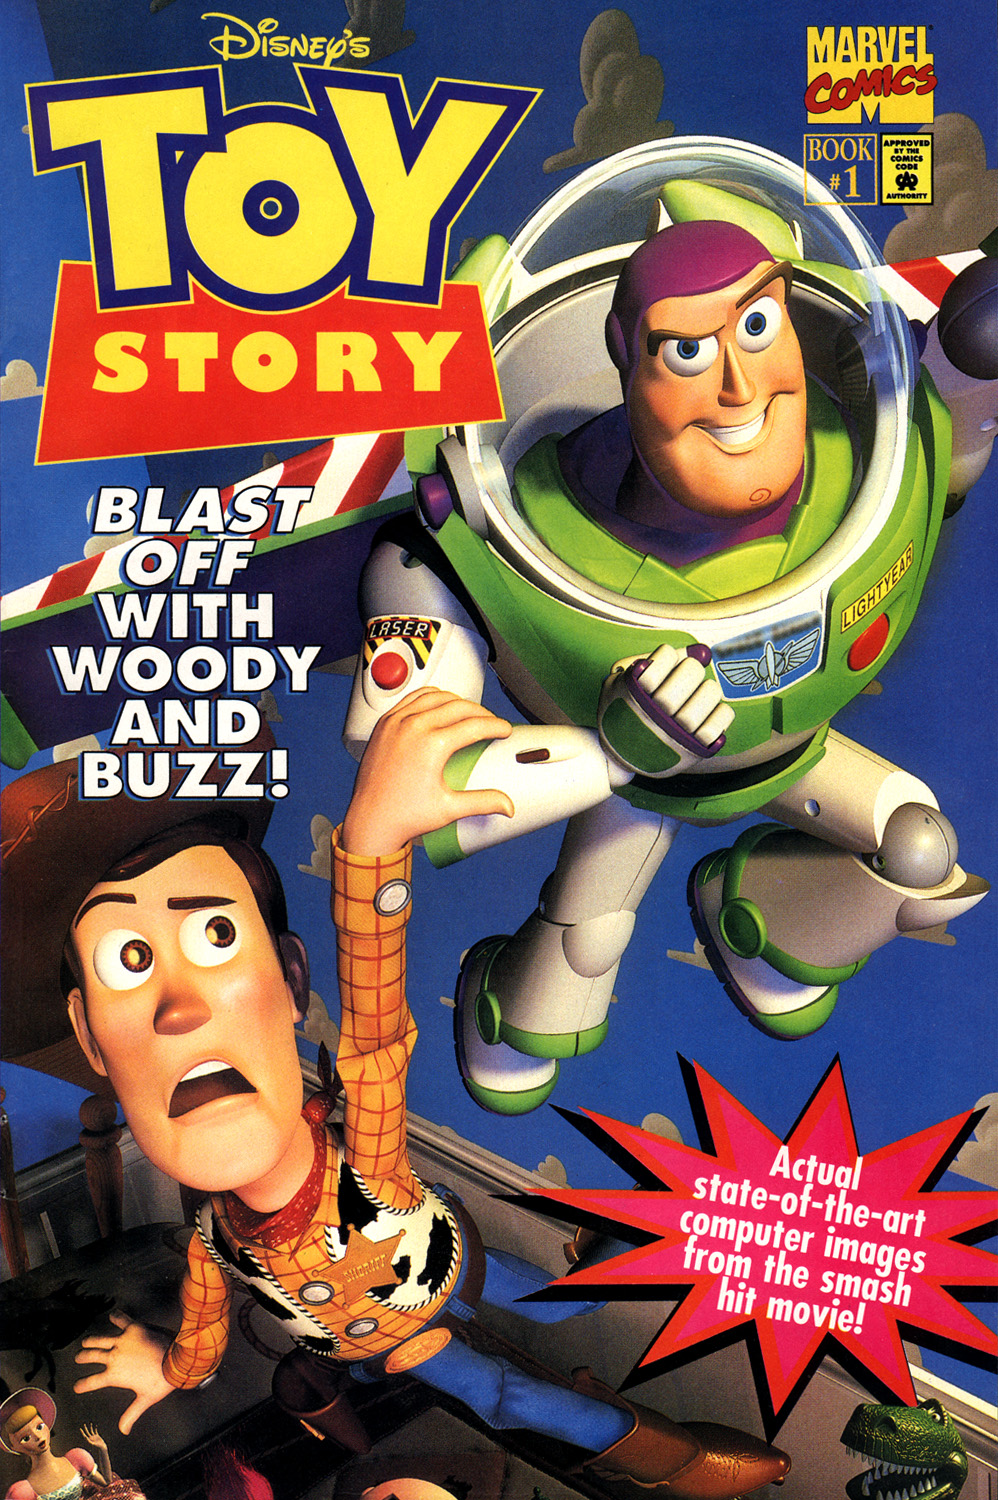 Read online Disney's Toy Story comic -  Issue #1 - 1